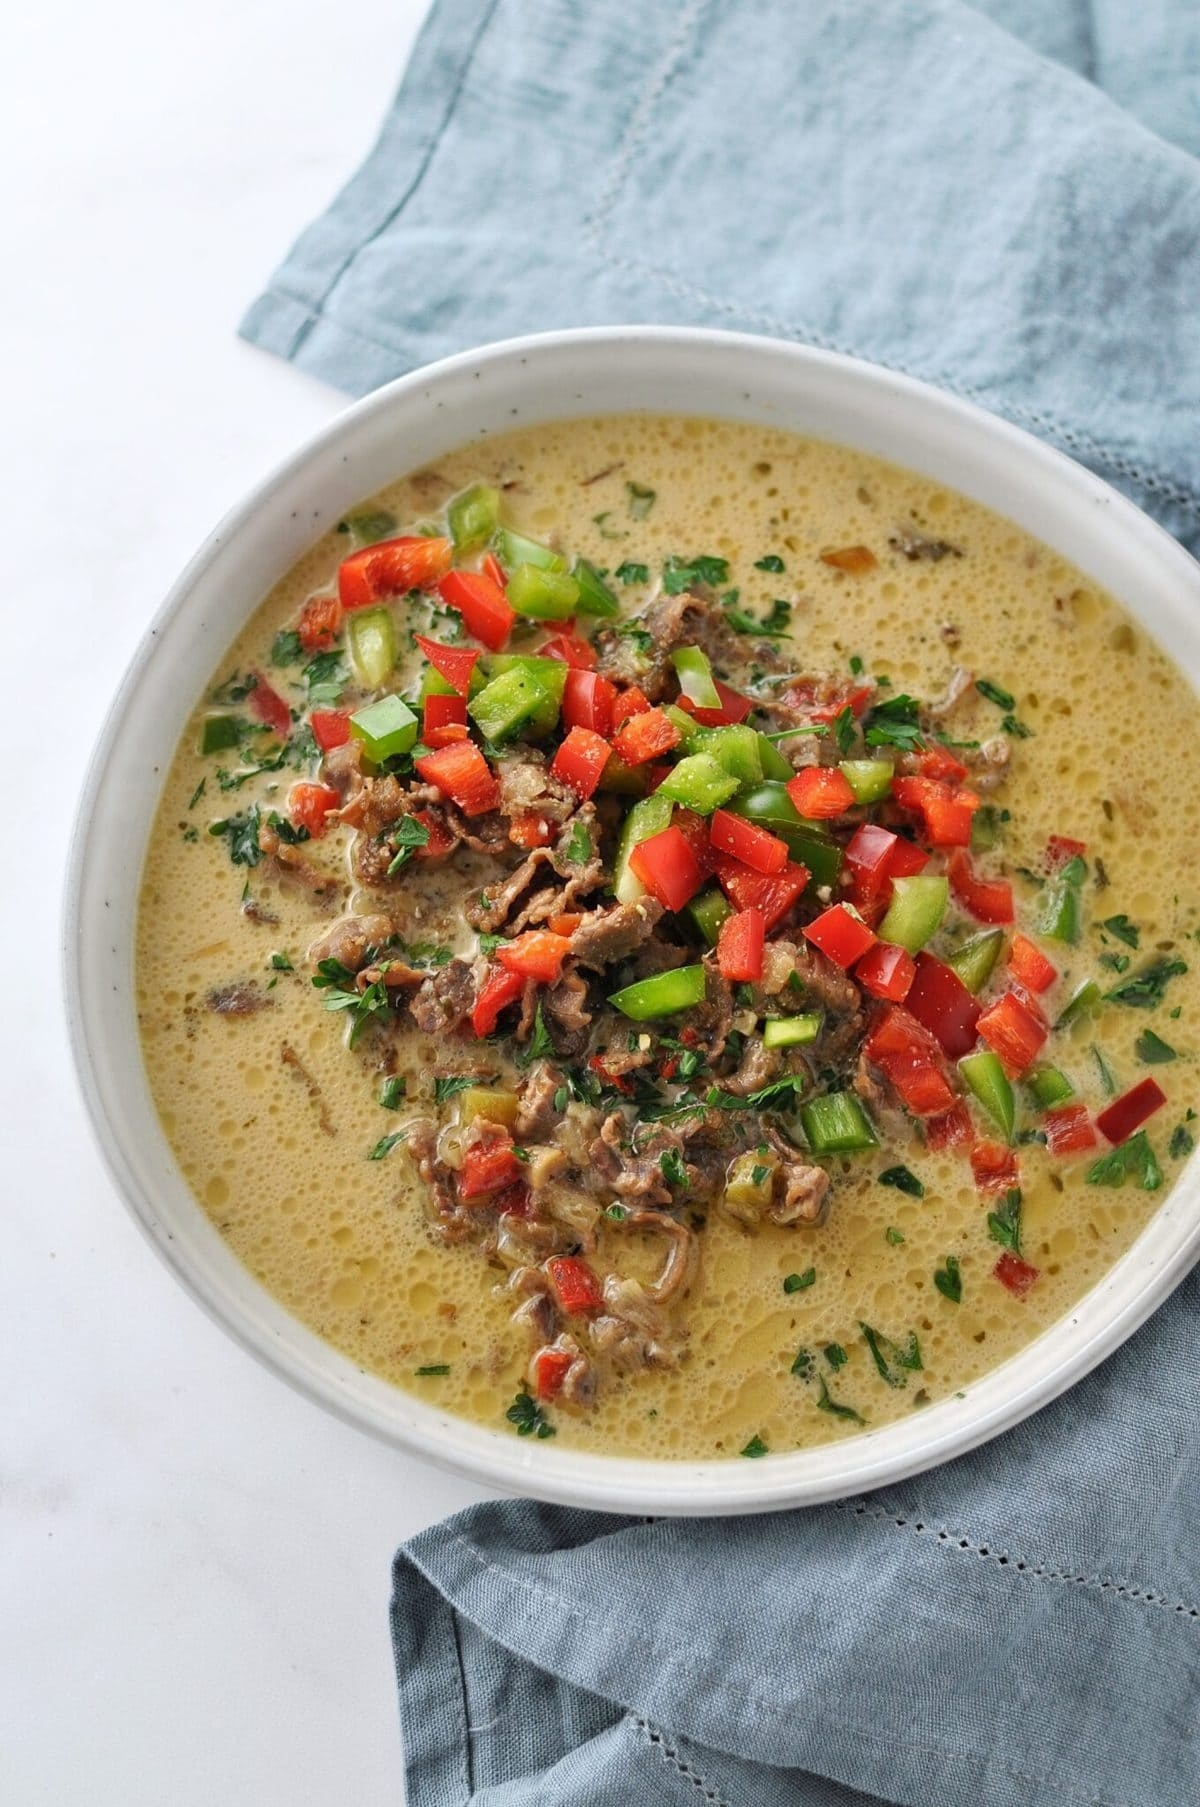 Philly cheesesteak soup